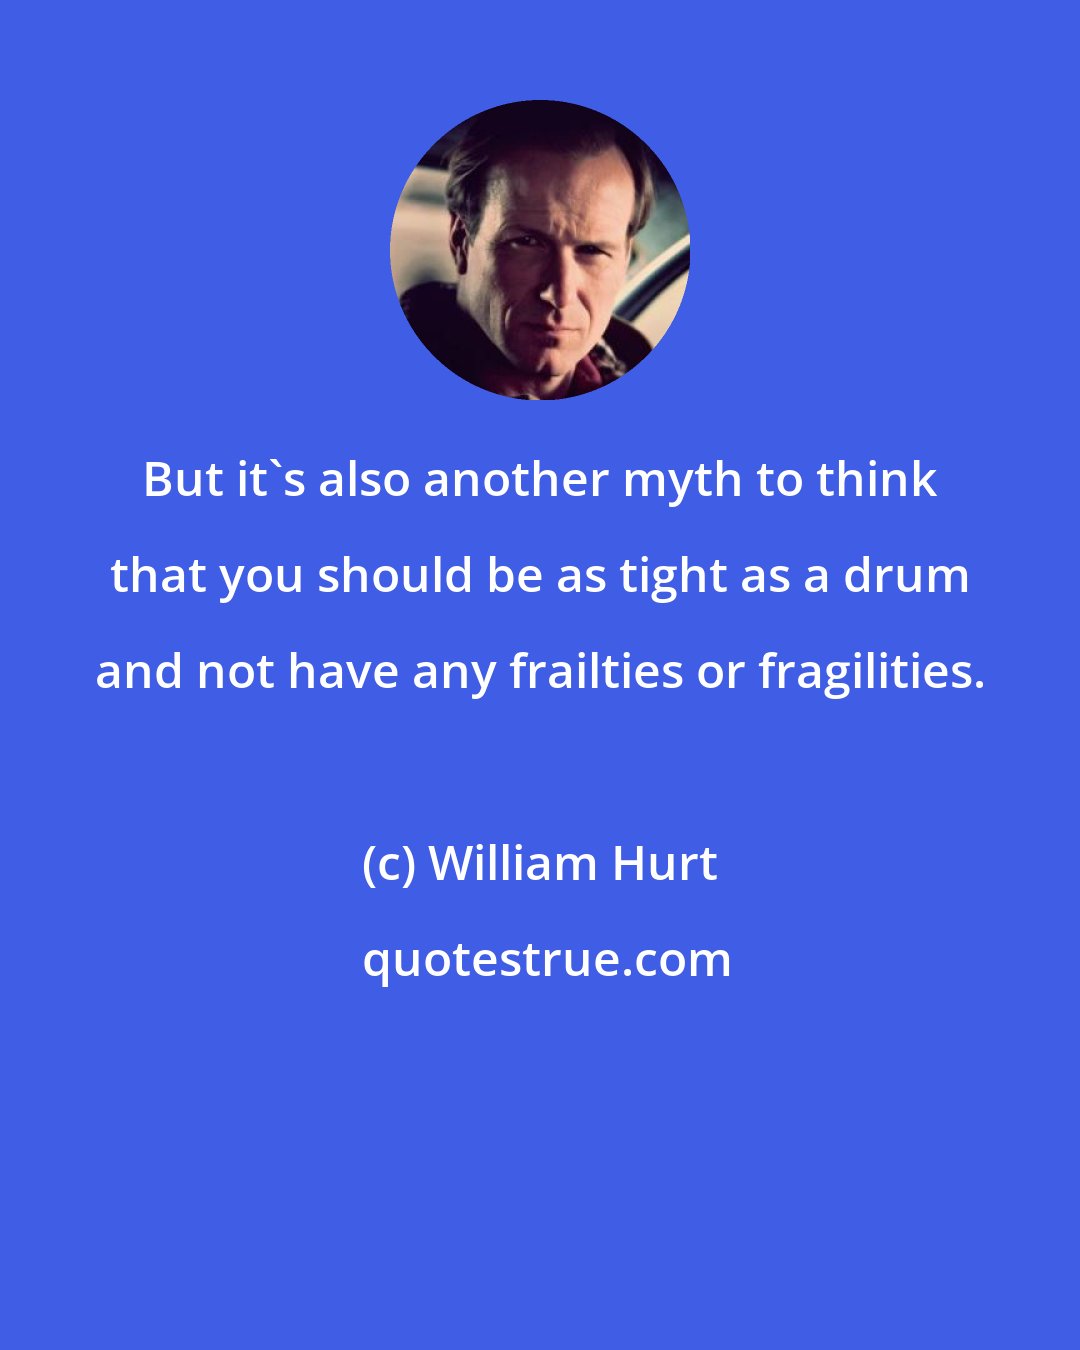 William Hurt: But it's also another myth to think that you should be as tight as a drum and not have any frailties or fragilities.